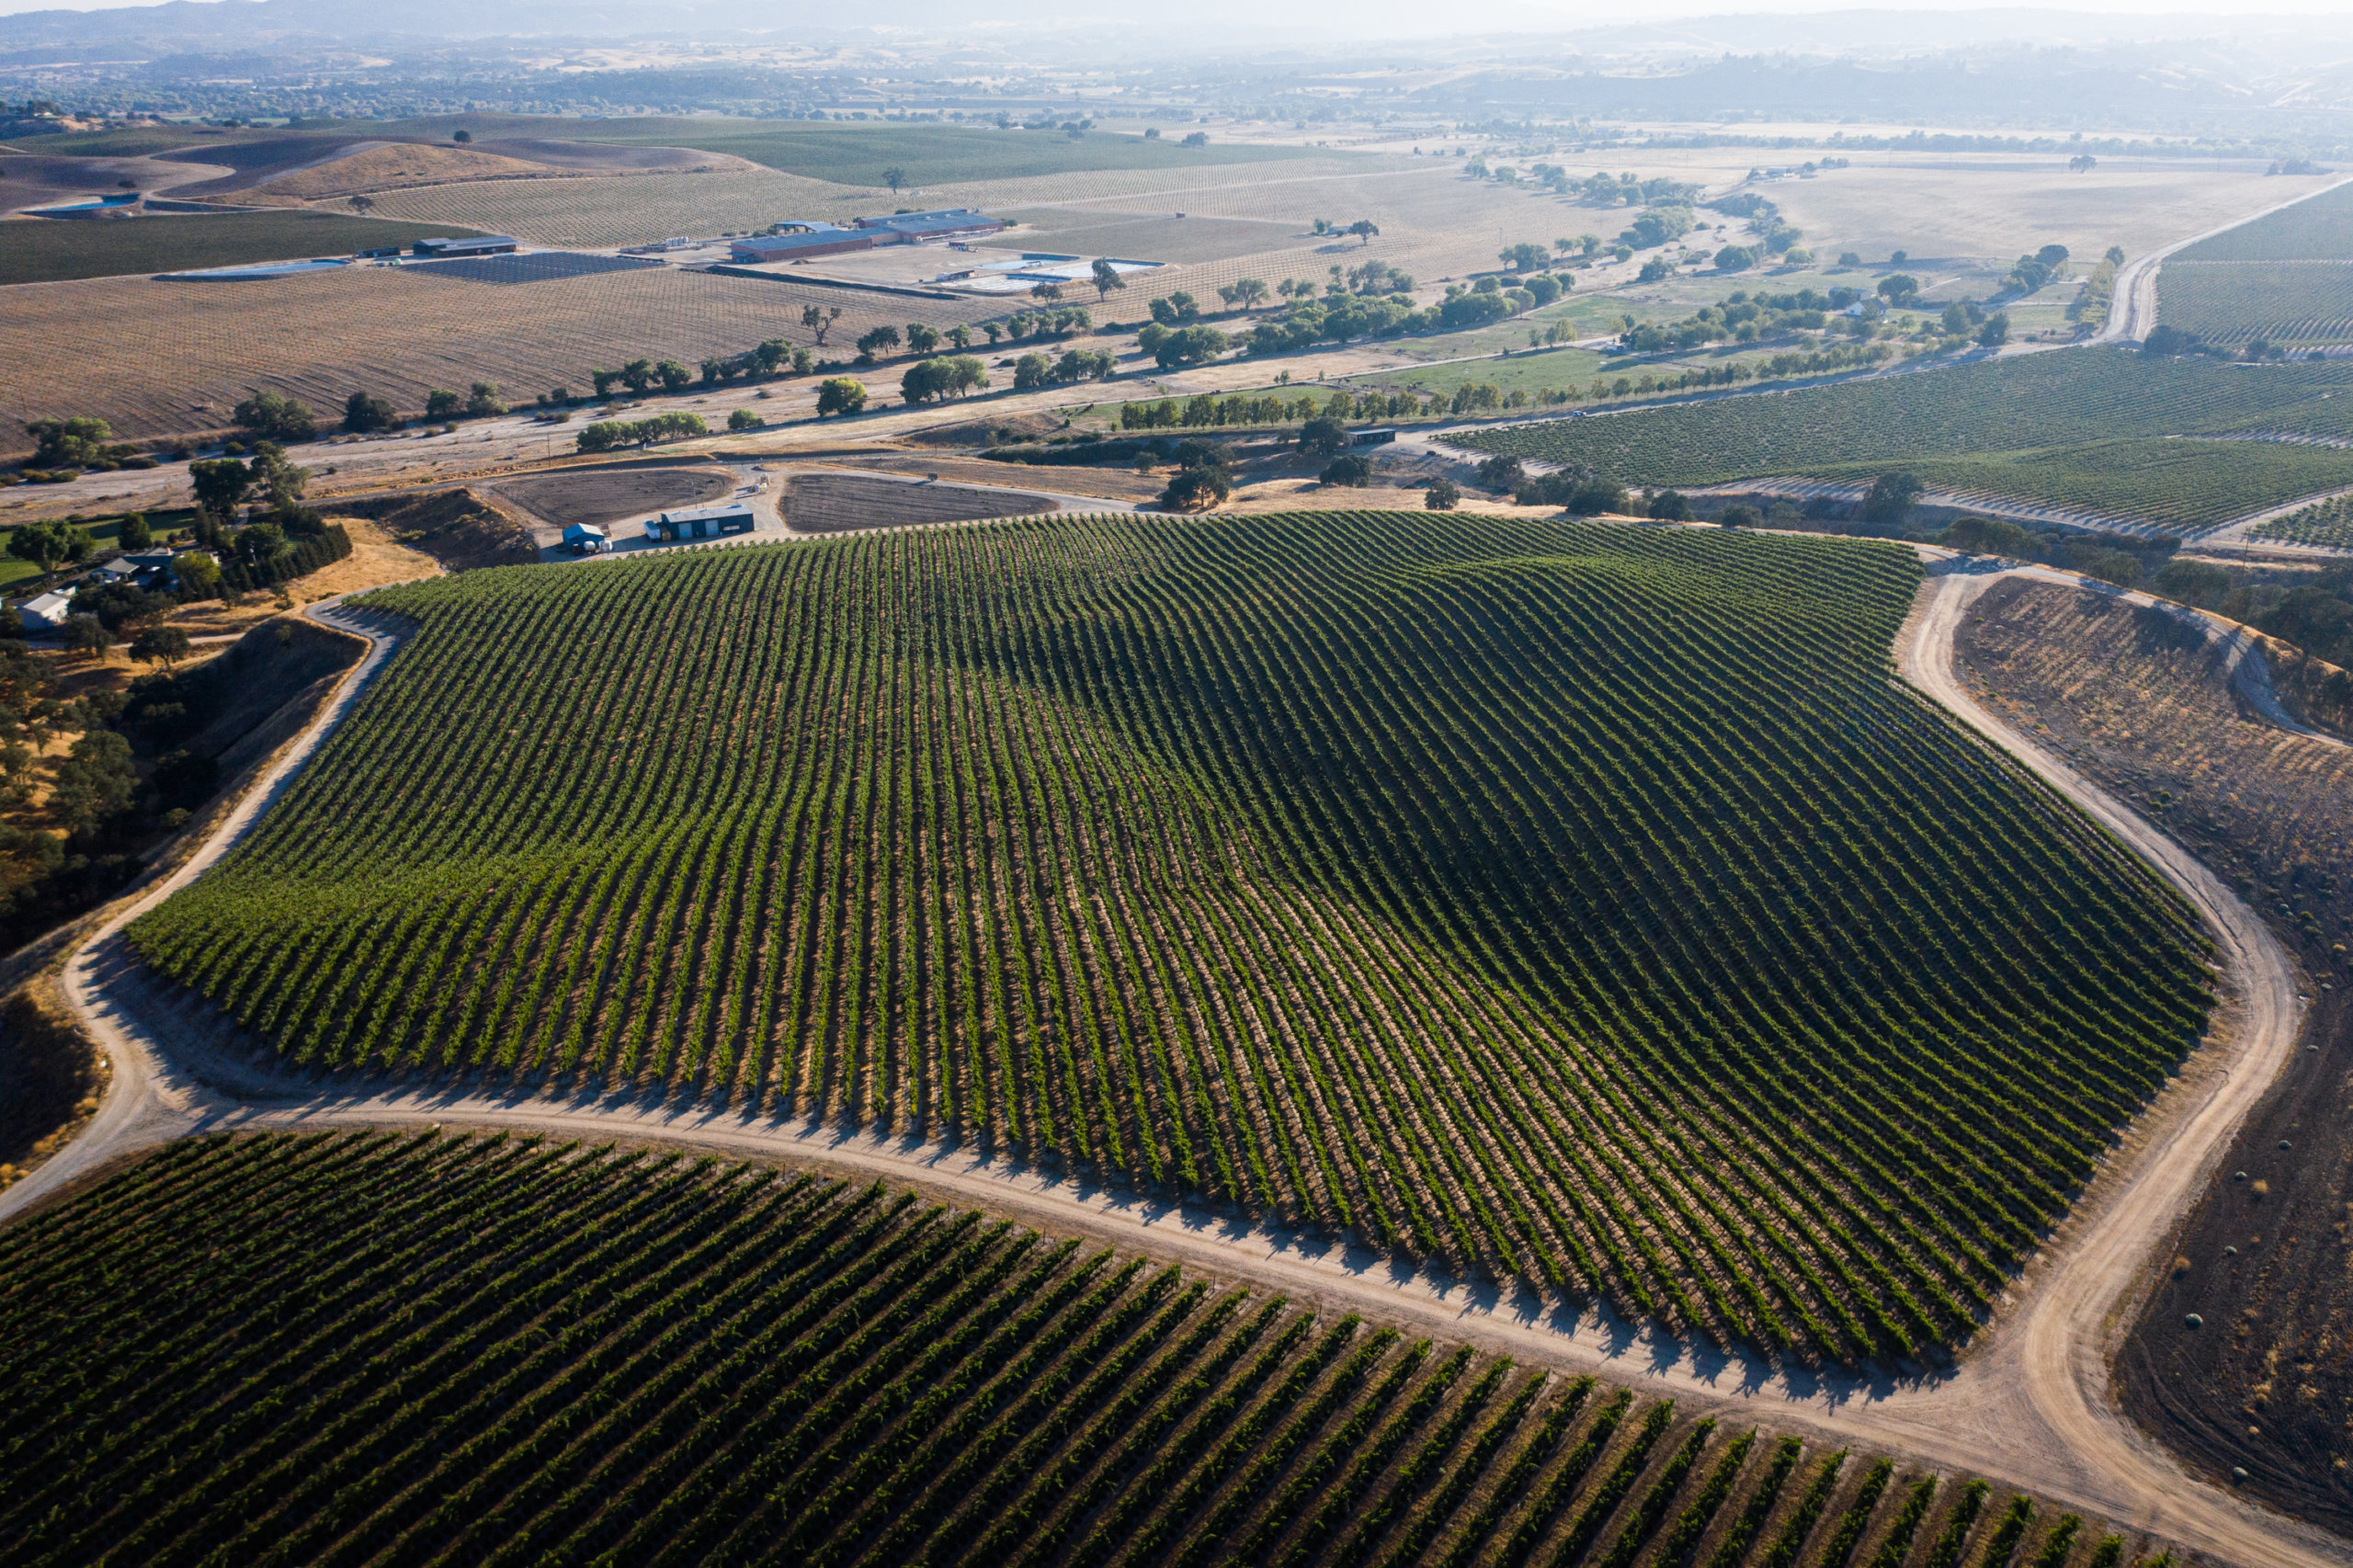 Rolling foothills planted in wine grapes